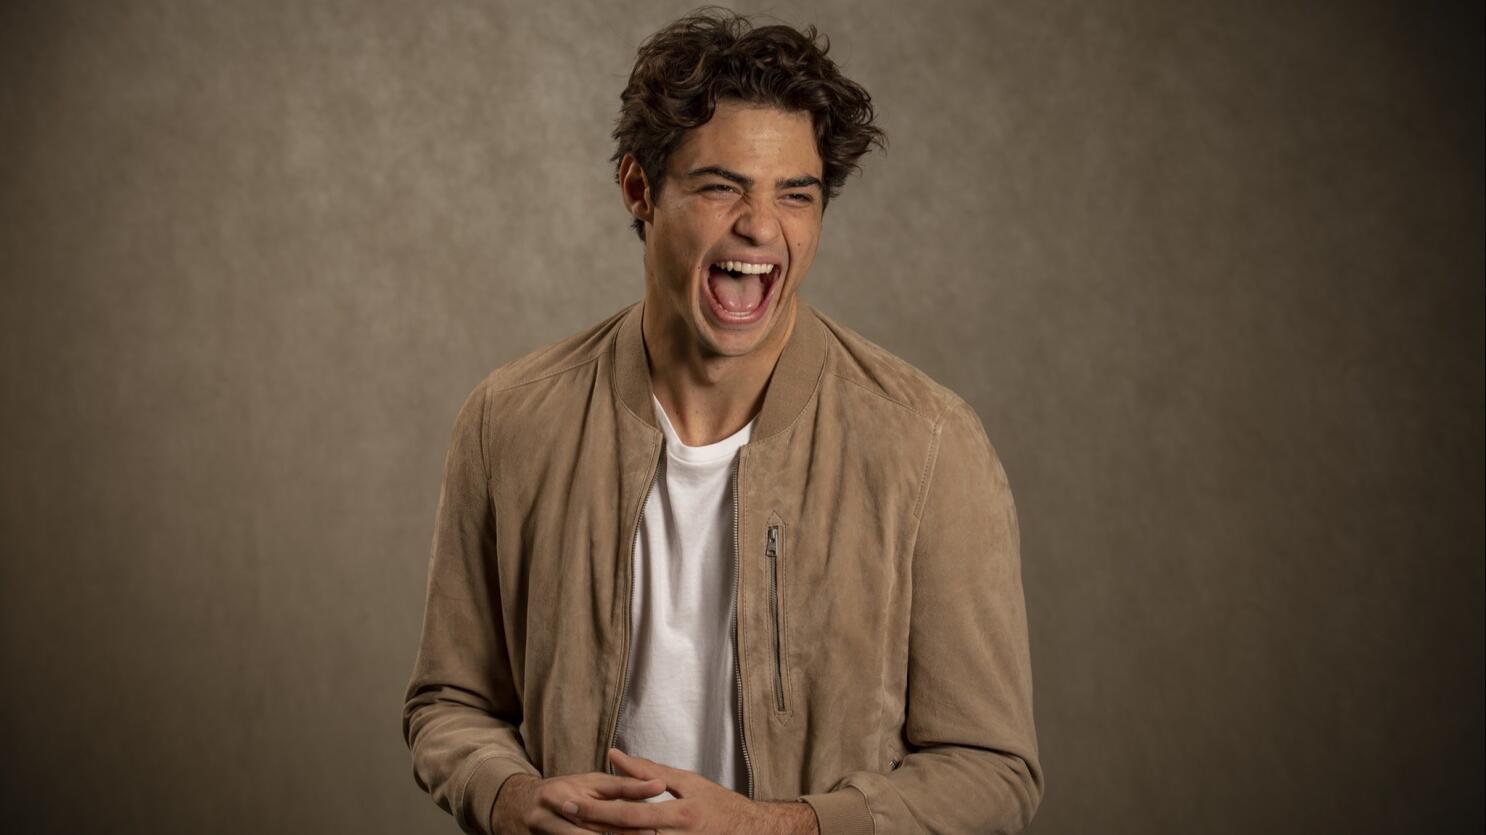 Move over, Zac Efron: Noah Centineo is this summer's new teen